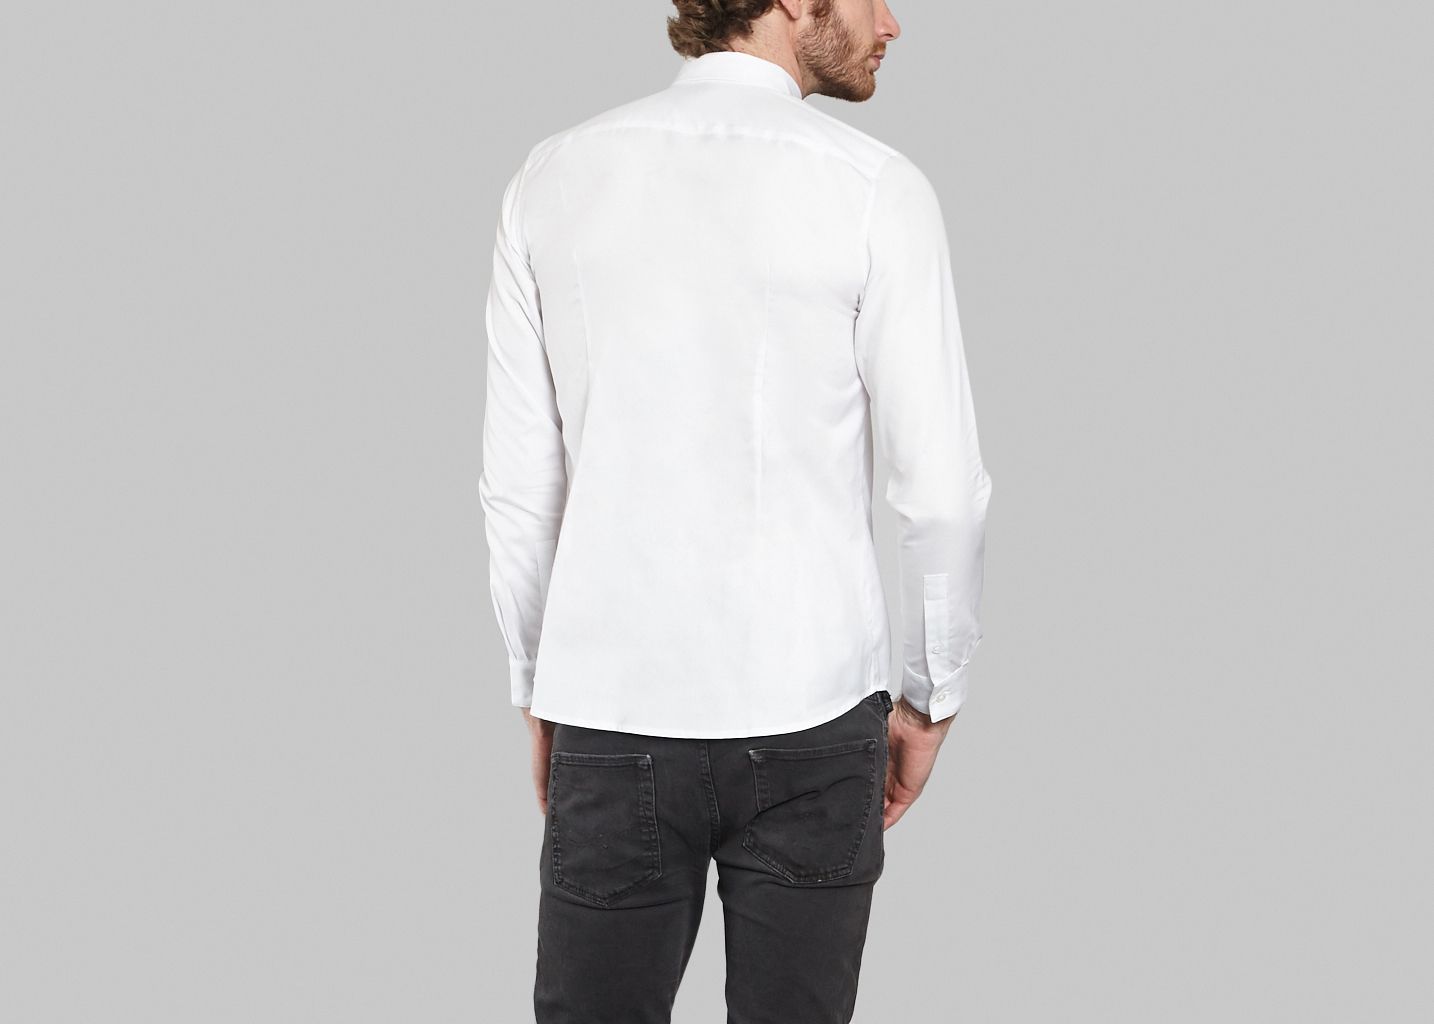 Magnetism Shirt - The Faraday Project